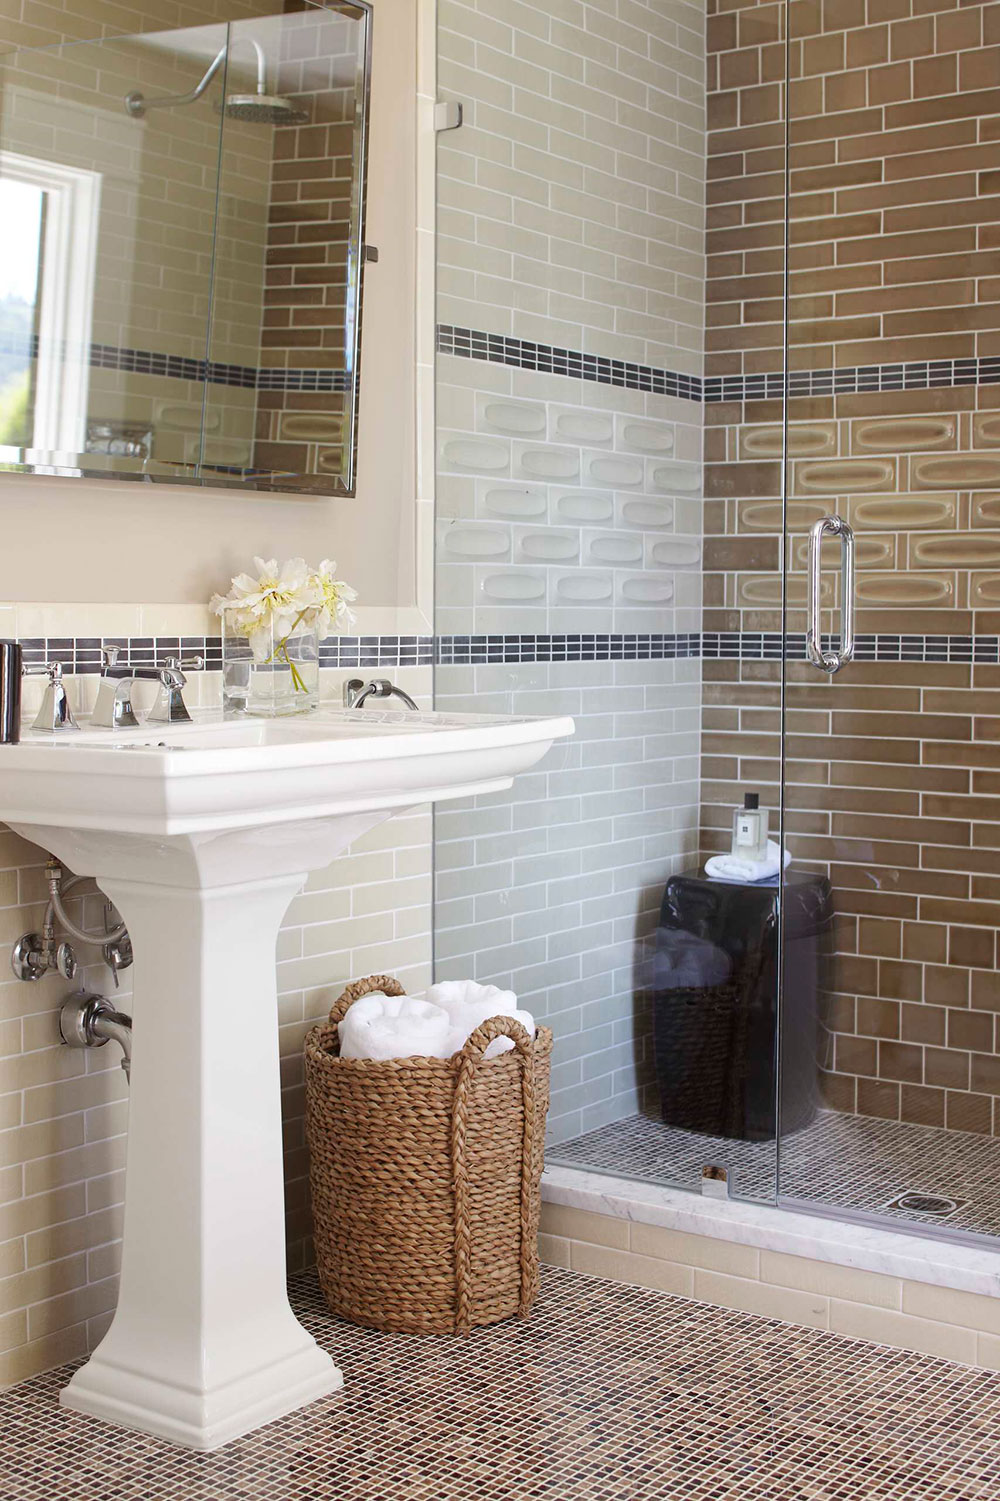 How-To-Make-A-Small-Bathroom-Look-Bigger11 How To Make A Small Bathroom Look Bigger - Tips and Ideas